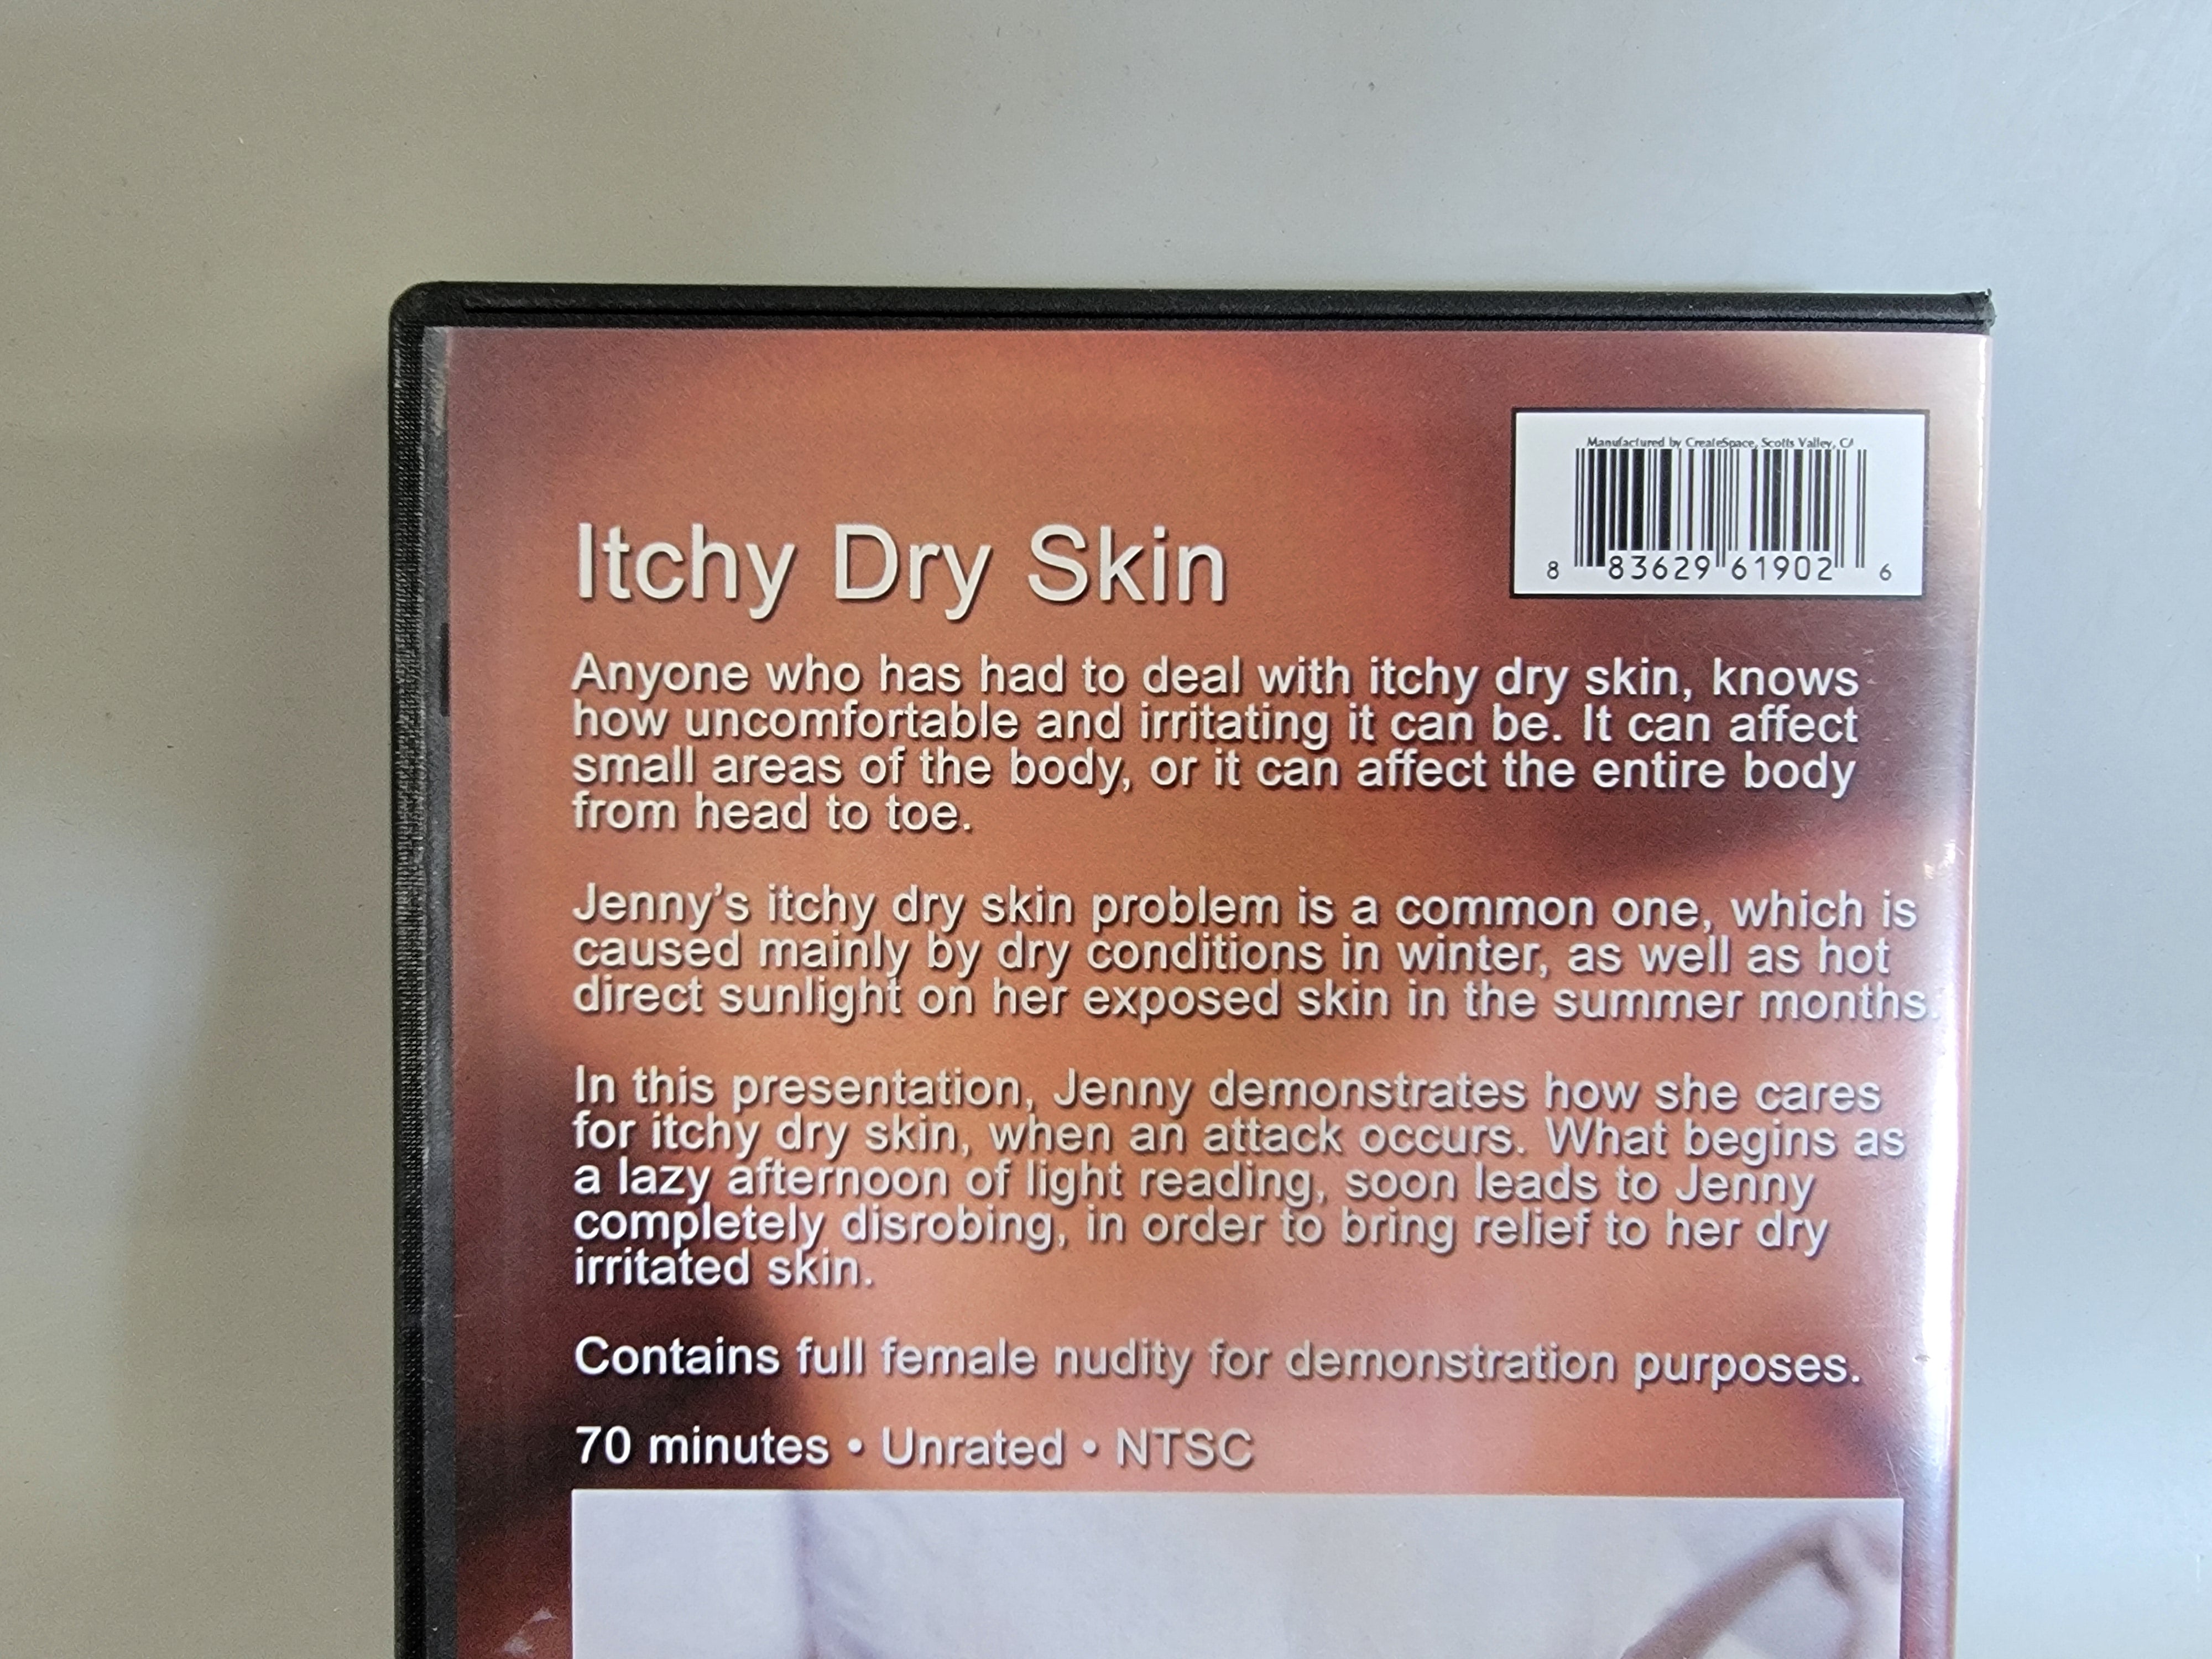 ITCHY DRY SKIN DVD [USED]